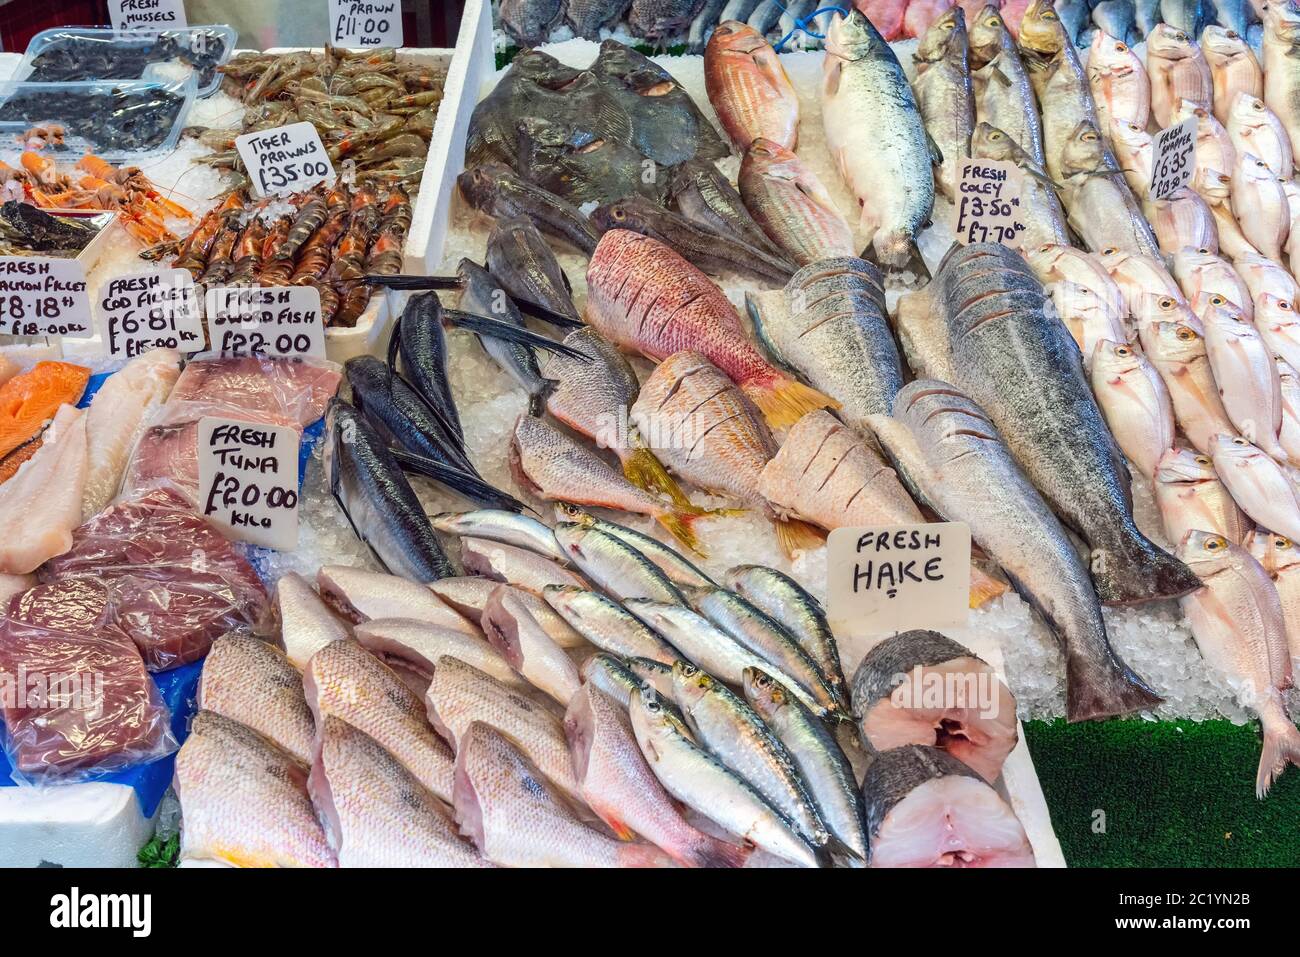 Different kinds of fish and prawns for sale at a market in Brixton, London Stock Photo